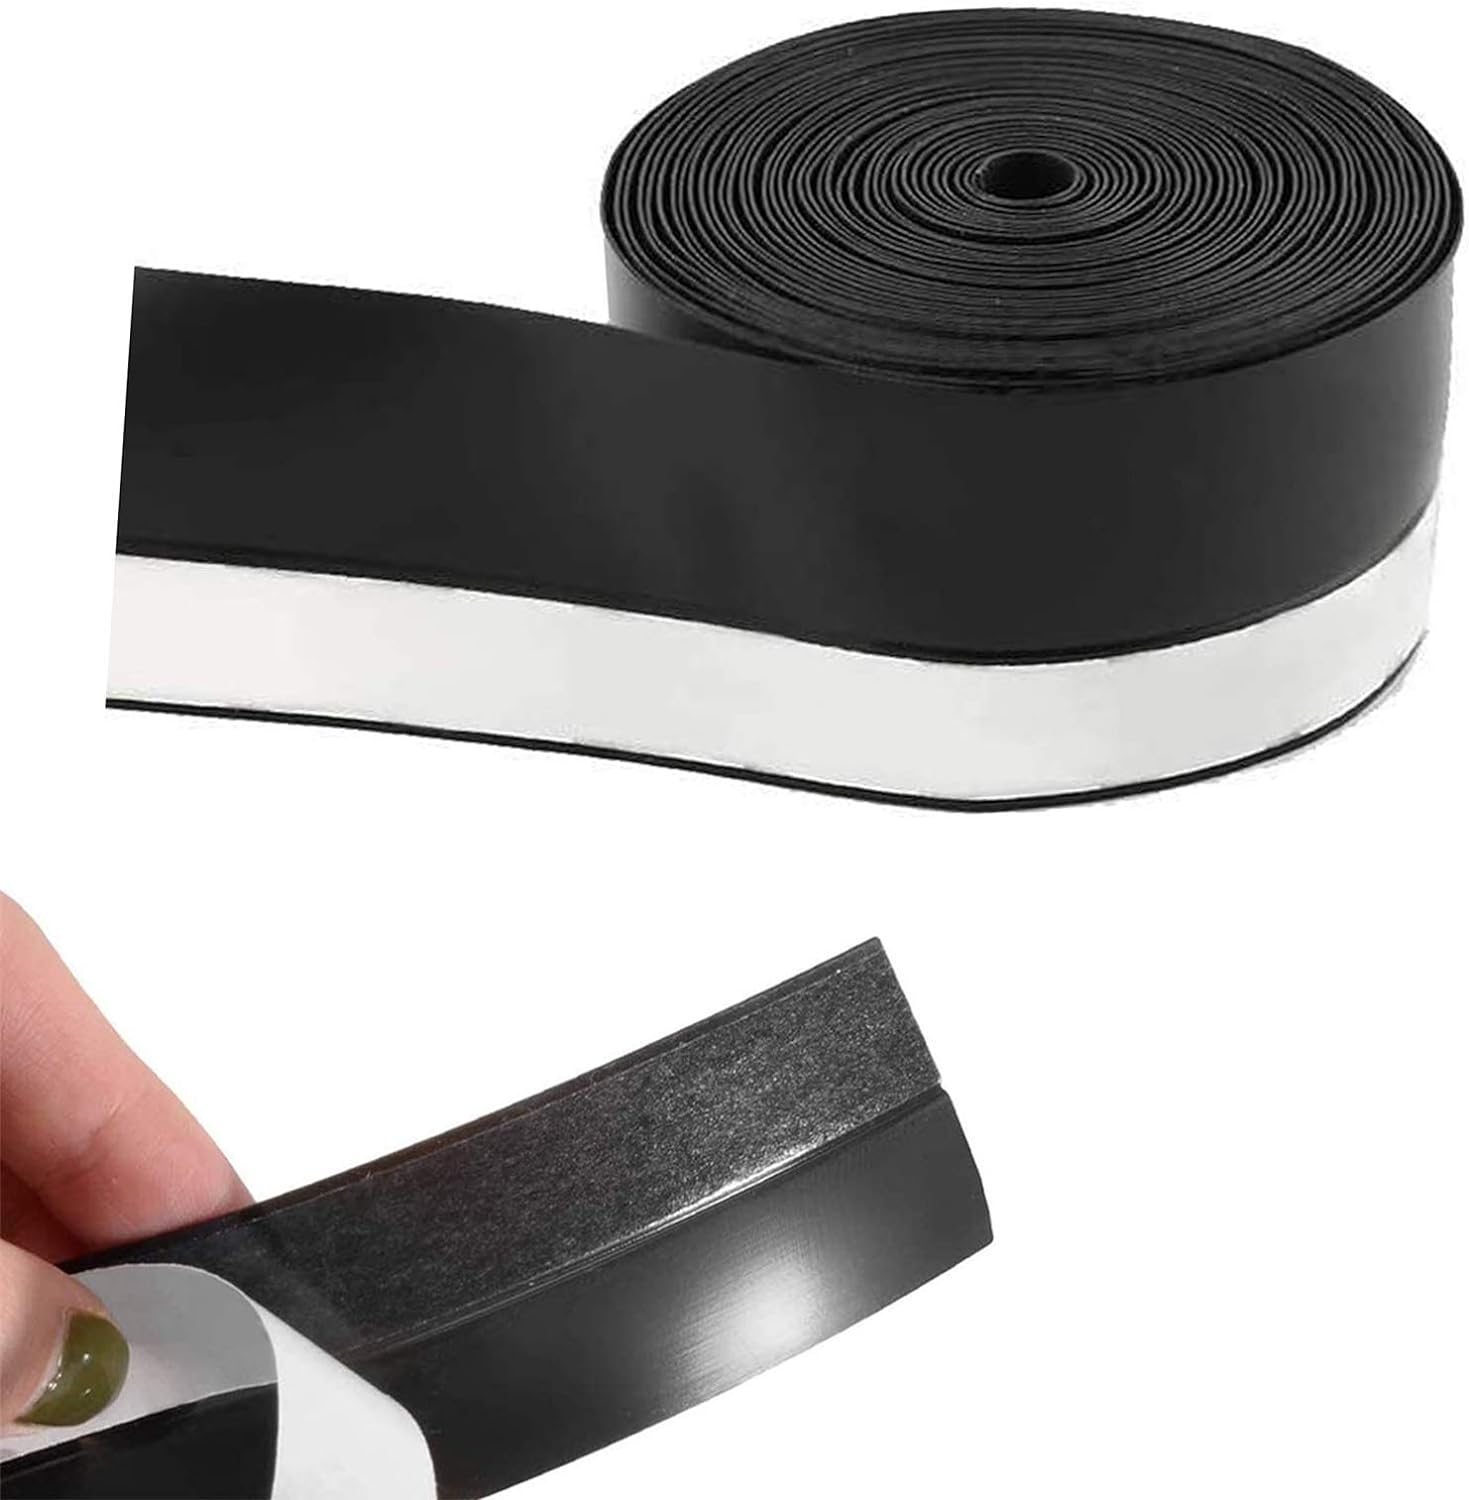 26 Feet Silicone Seal Strip, Door Weather Stripping Door Seal Strip Window Seal Silicone Sealing Tape for Door Draft Stopper Adhesive Tape for Doors Windows and Shower Glass Gaps (Black, 45MM)